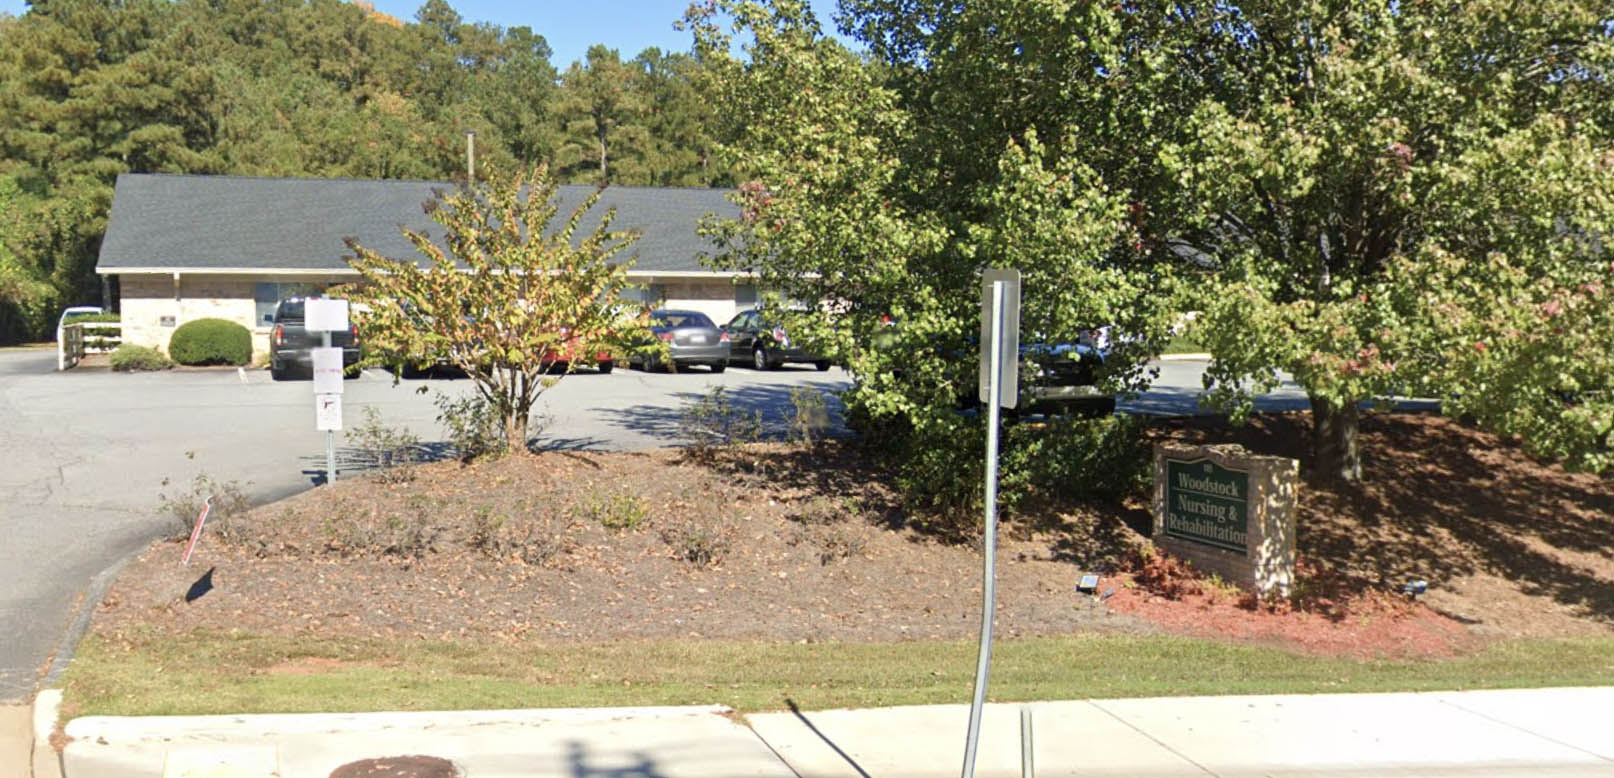 PHOTO: In this screen grab from Google Maps, the Woodstock Nursing and Rehabilitation Center is shown in Woodstock, Ga.